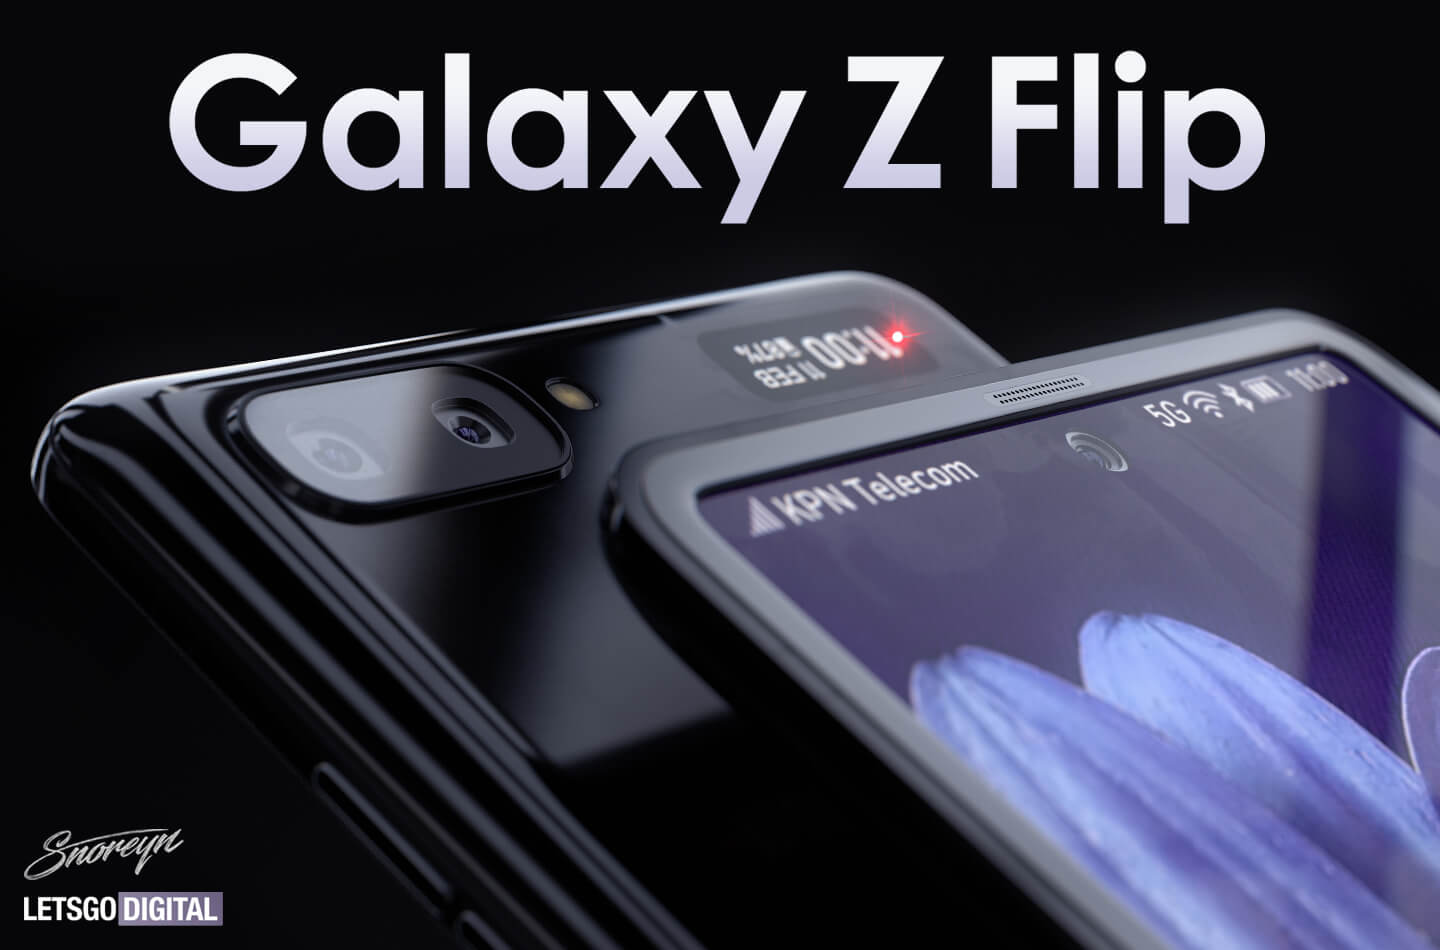 Samsung Galaxy Z Flip, new details come to light